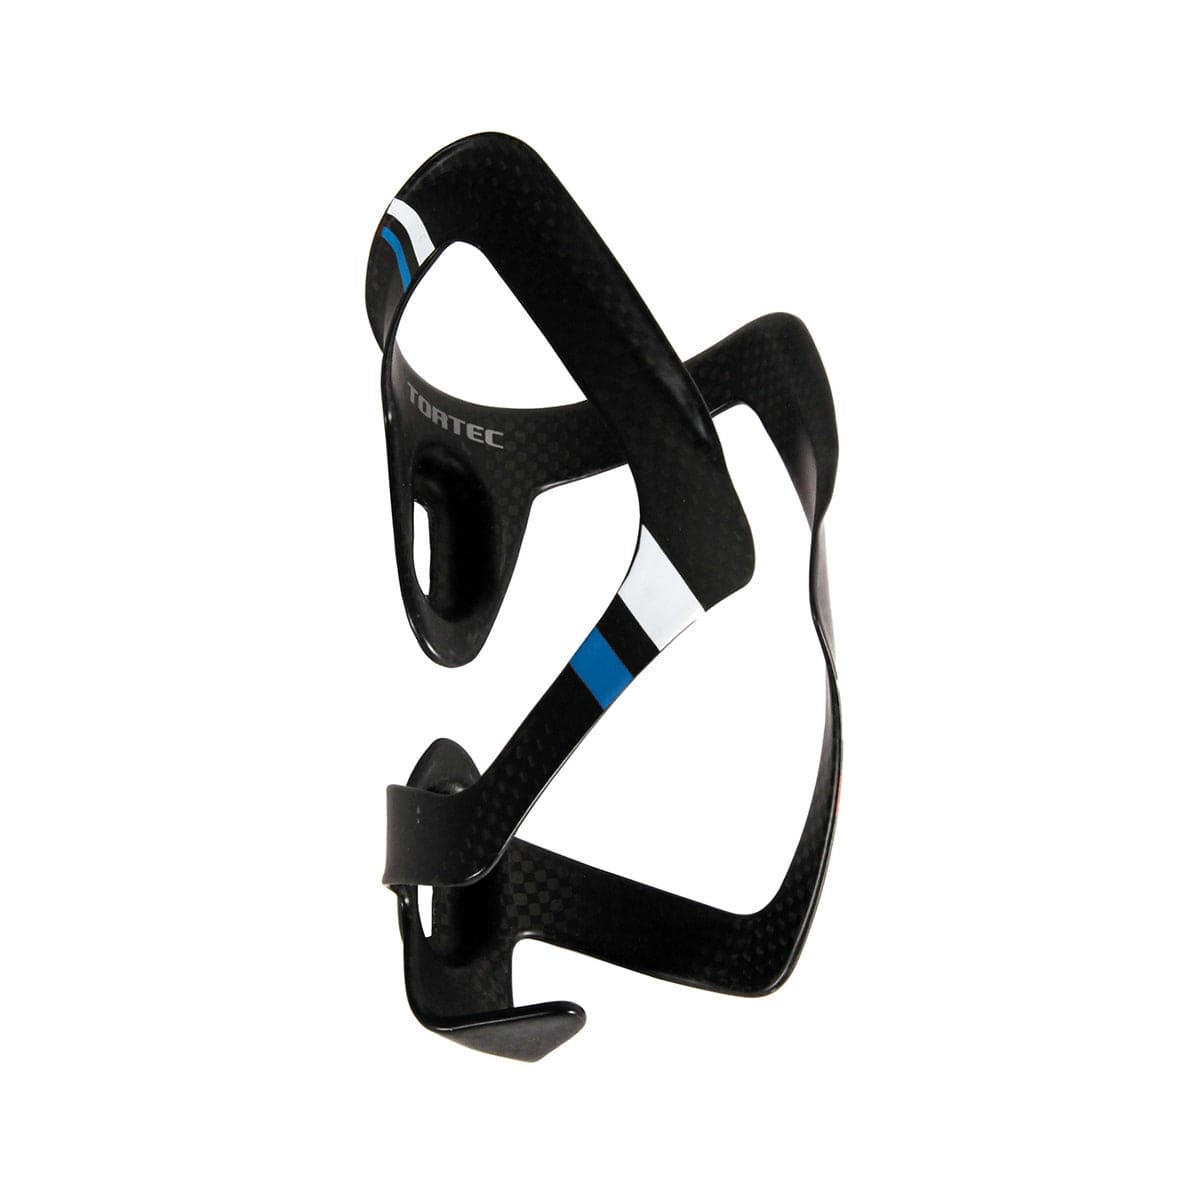 Cycle Tribe Colour Black-Blue Tortec Scala Cage